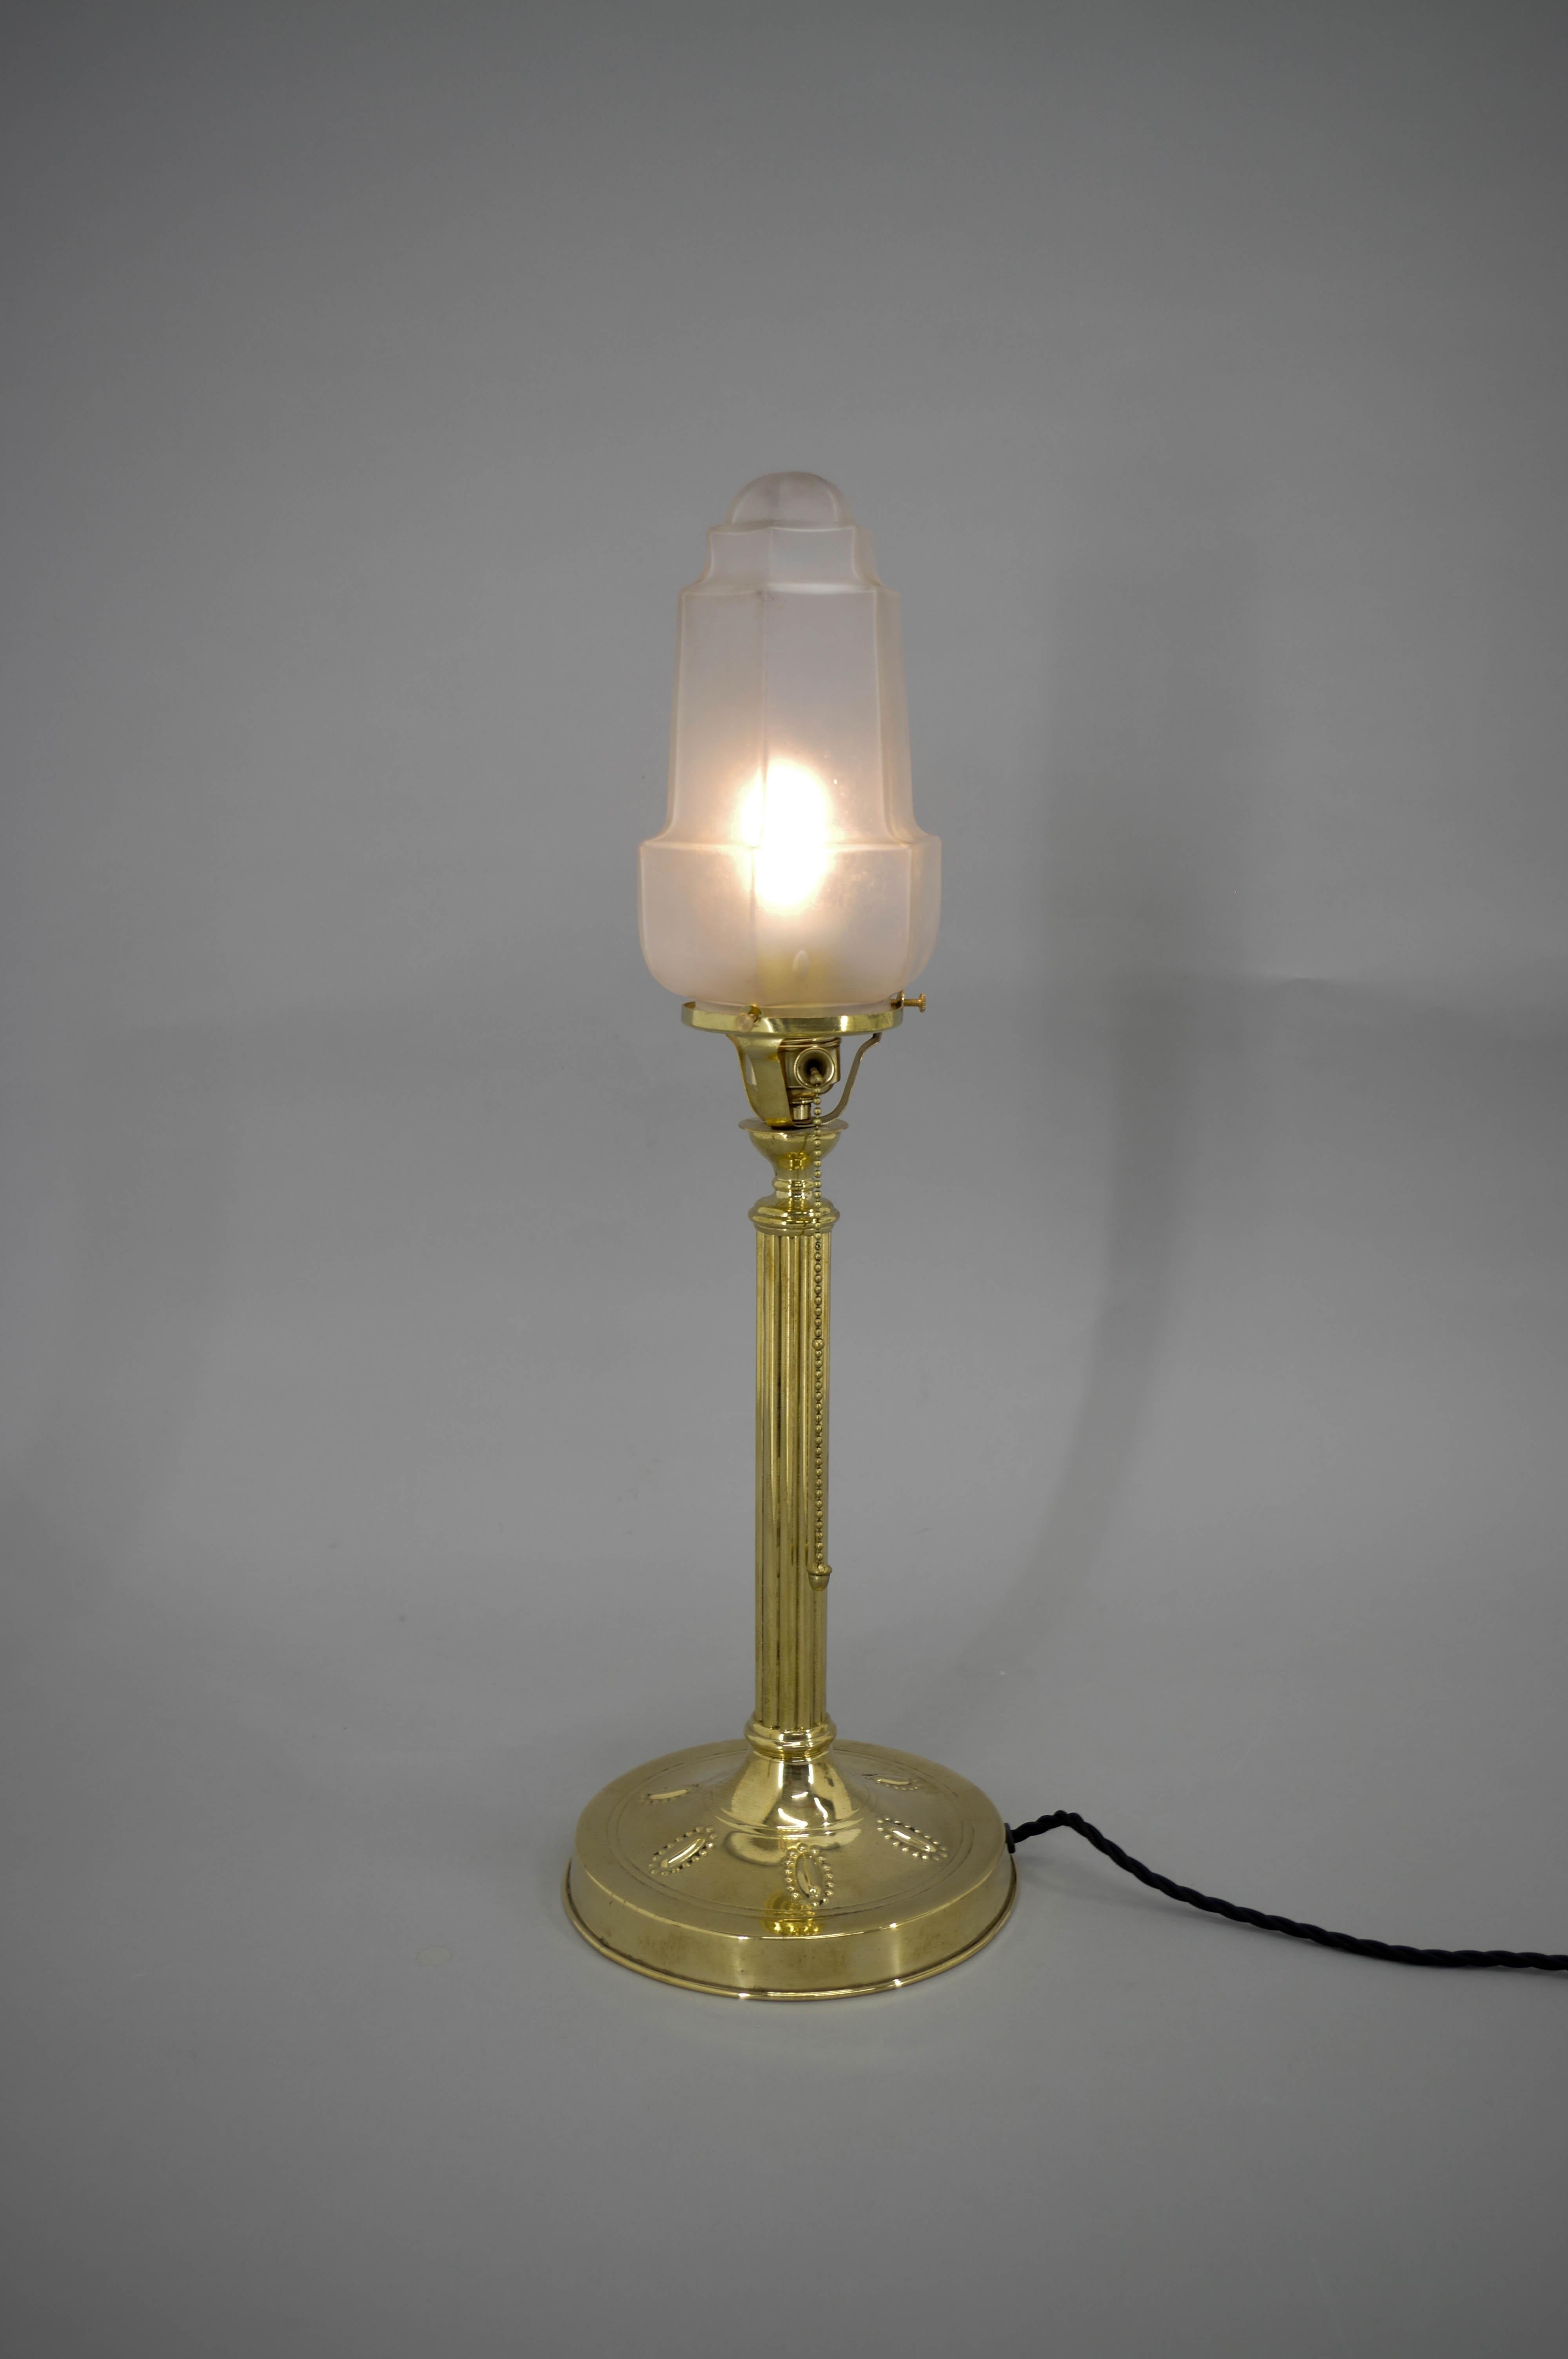 Art Nouveau table lamp made in Austria in 1910s.
Restored: cleaned, polished, rewired
1x40W, E25-E27 bulb
US plug adapter included